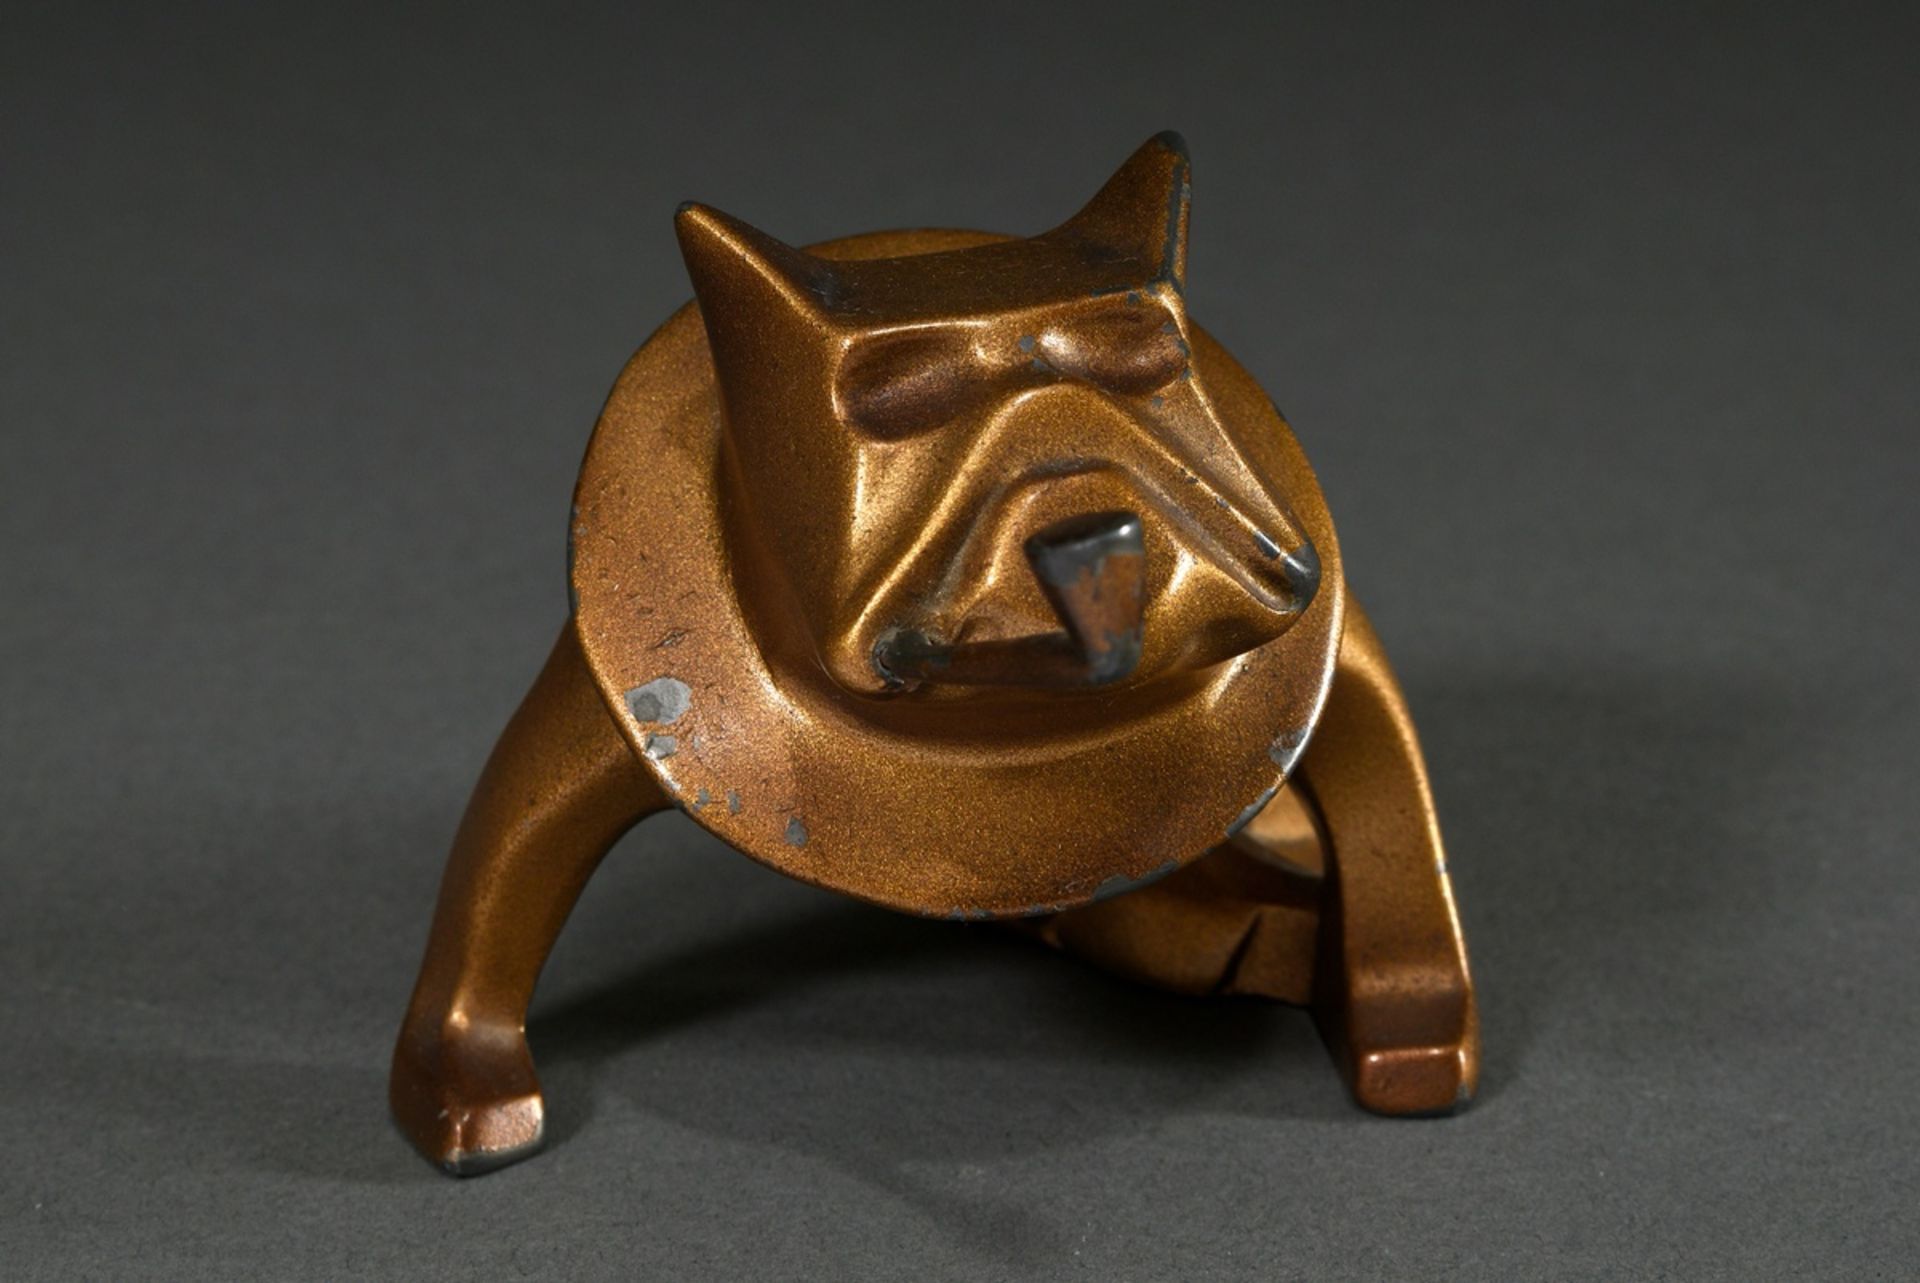 Sculpture "Bulldog with whistle", c. 1920, galvanised zinc casting, partially rubbed, 7.5x12x8.5cm, - Image 2 of 6